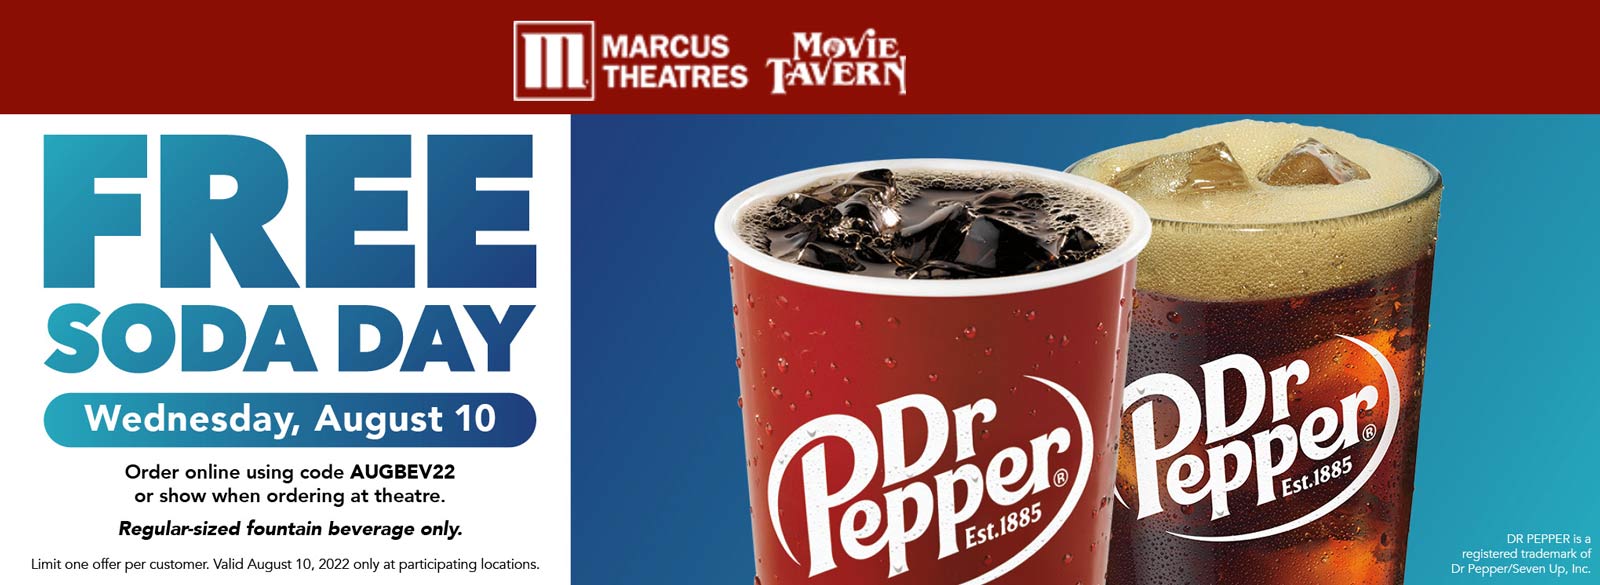 Marcus Theatres coupons & promo code for [December 2022]